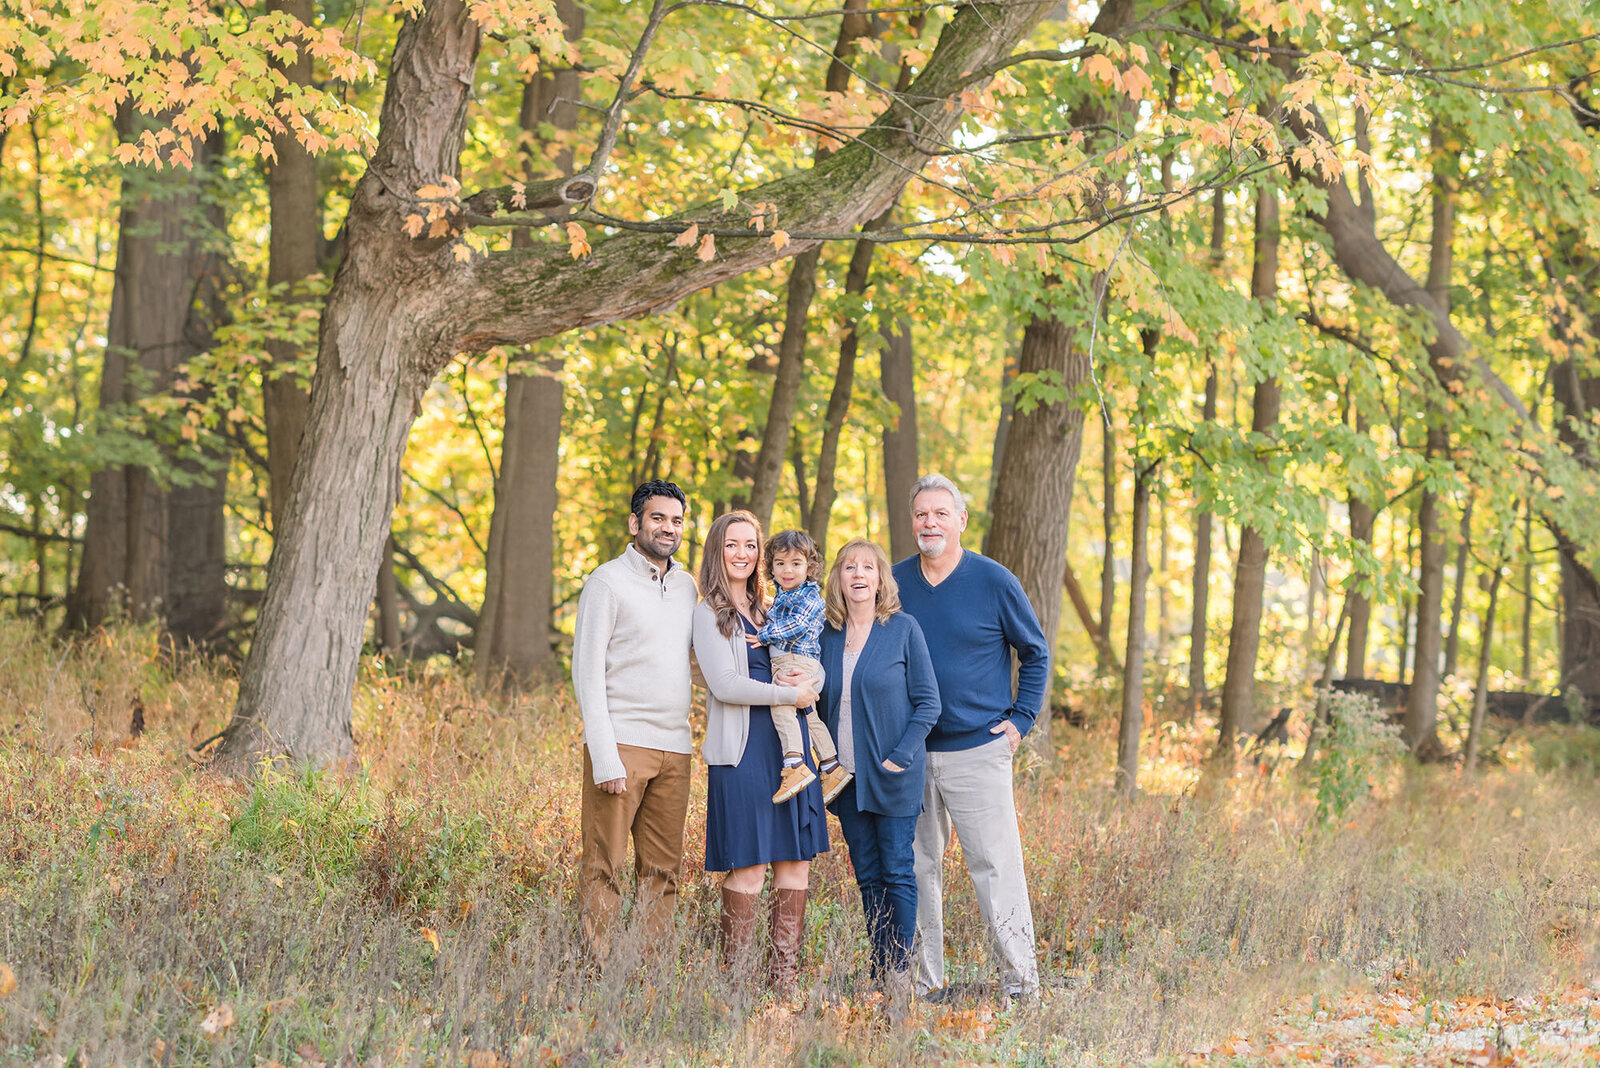 km-01-chicago-extended-family-portraits